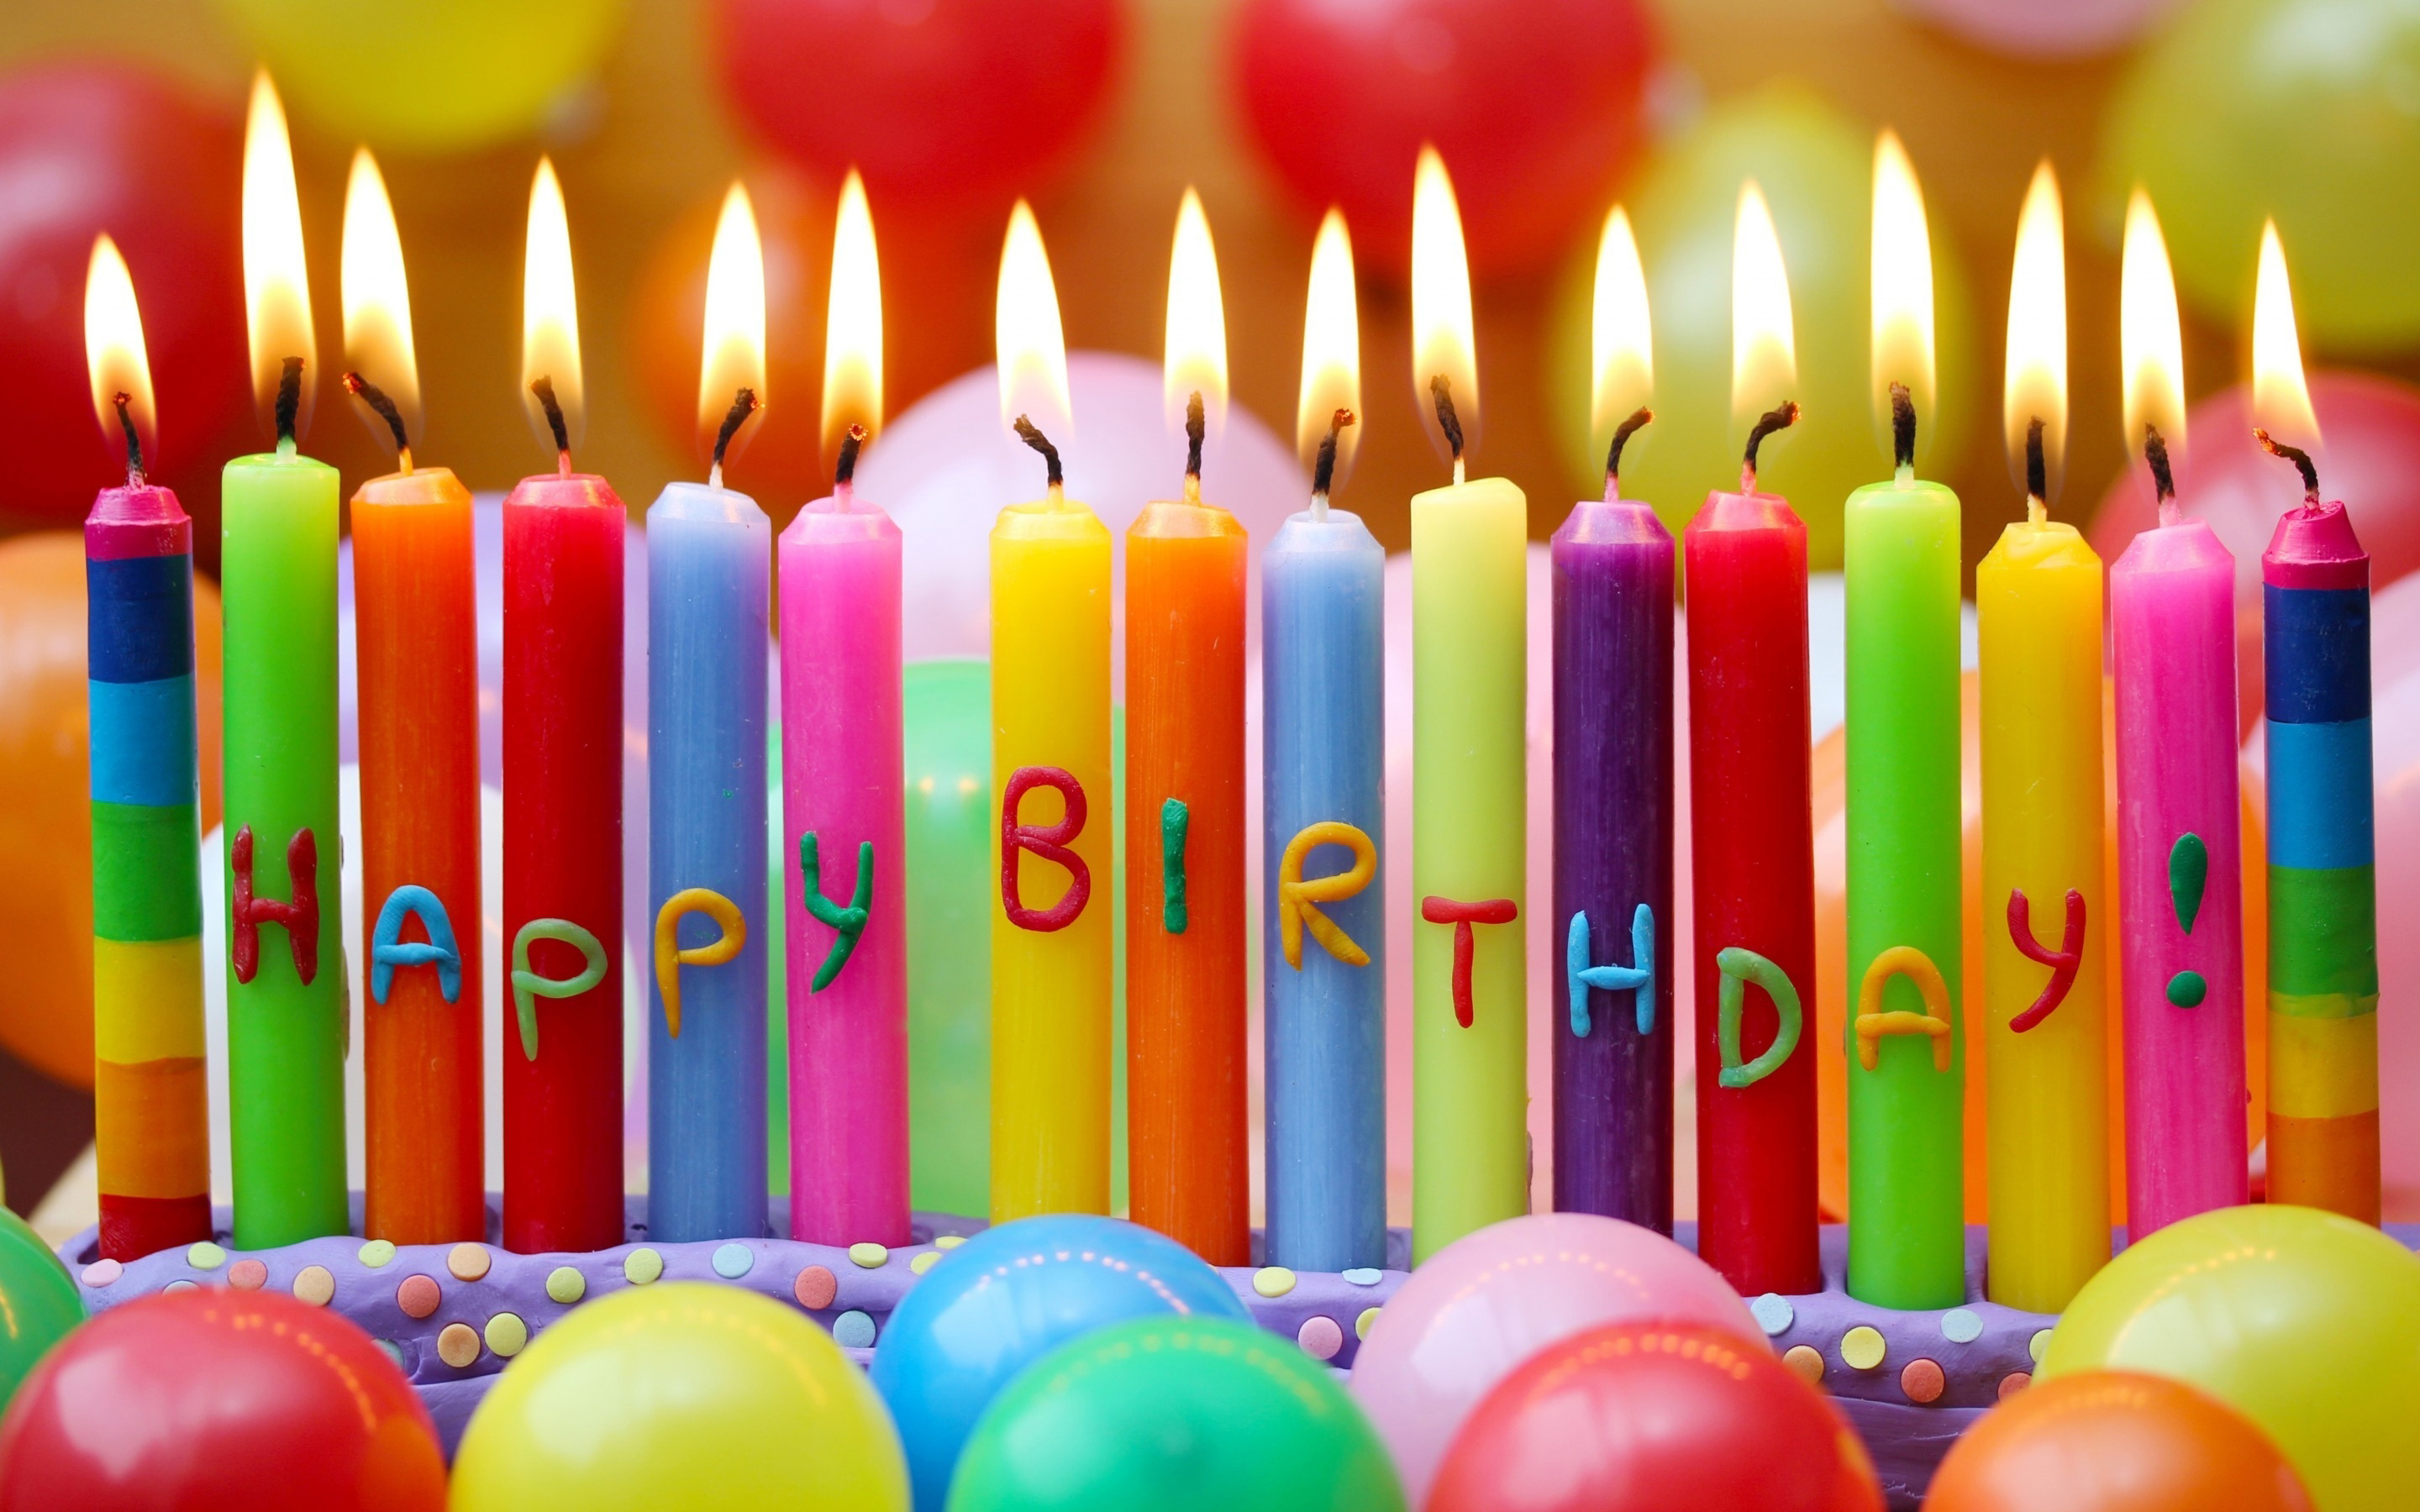 Happy Birthday Candles Wallpaper Background 49189 2880x1800 px ...